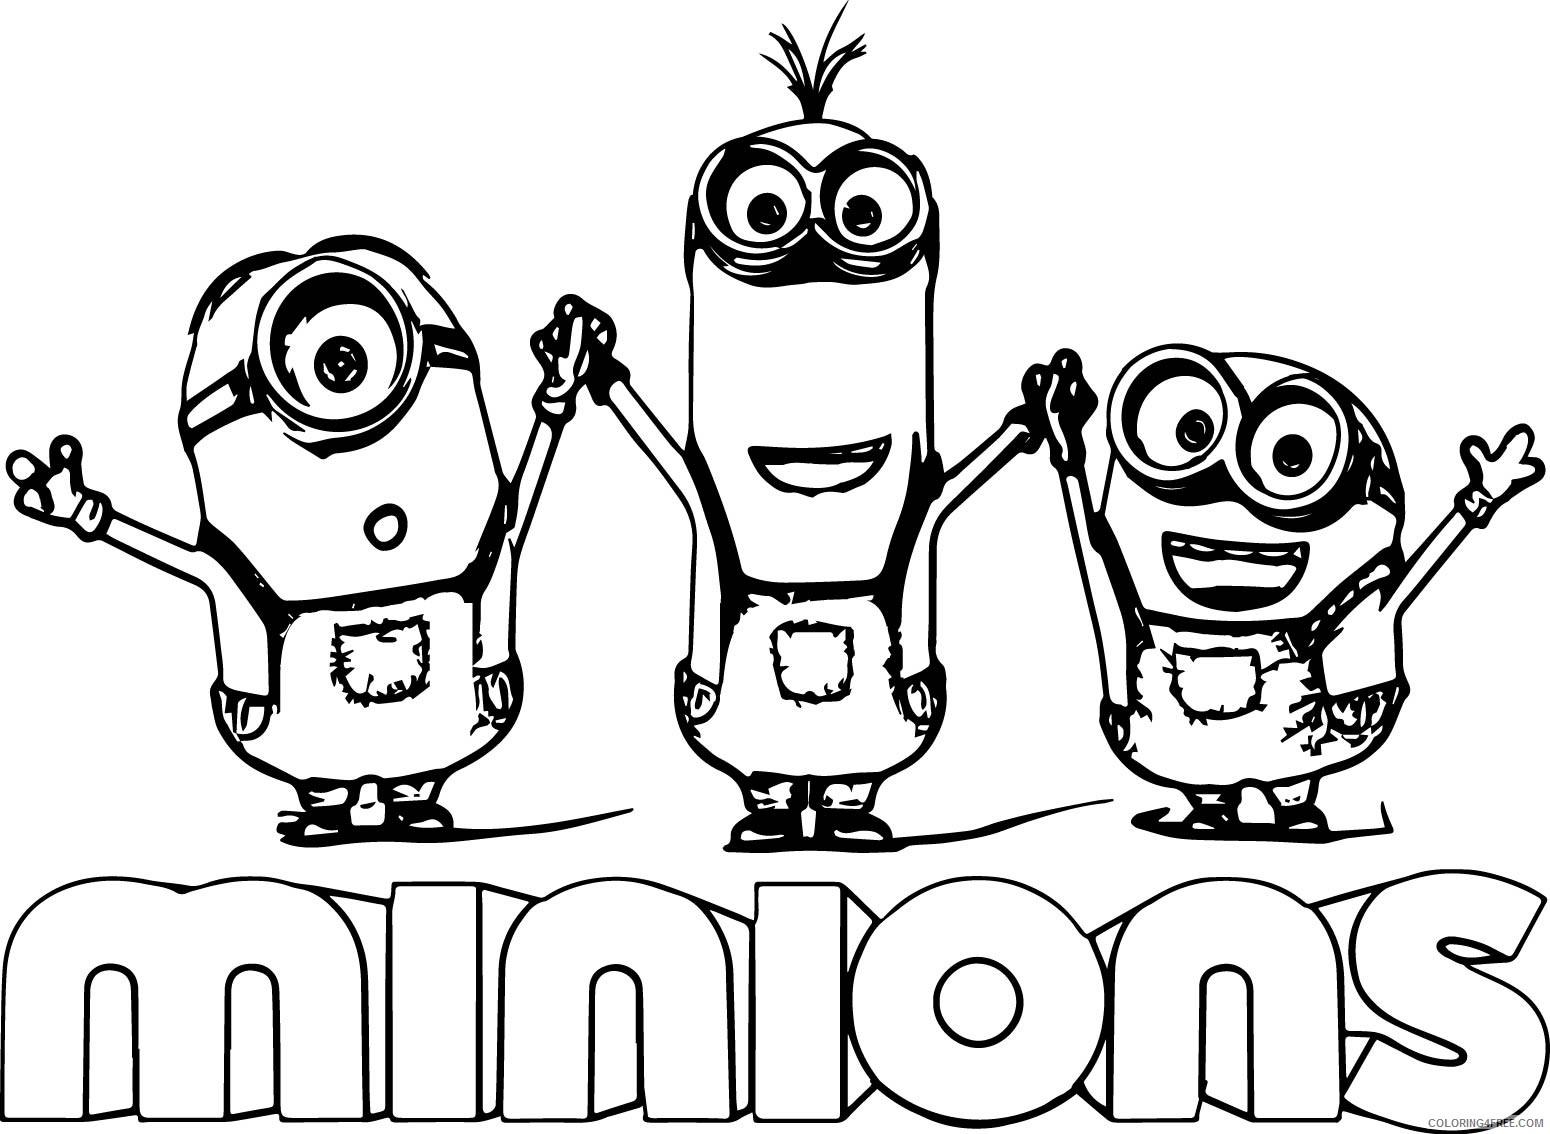 Download Minion Bob Coloring Pages - Coloring Home